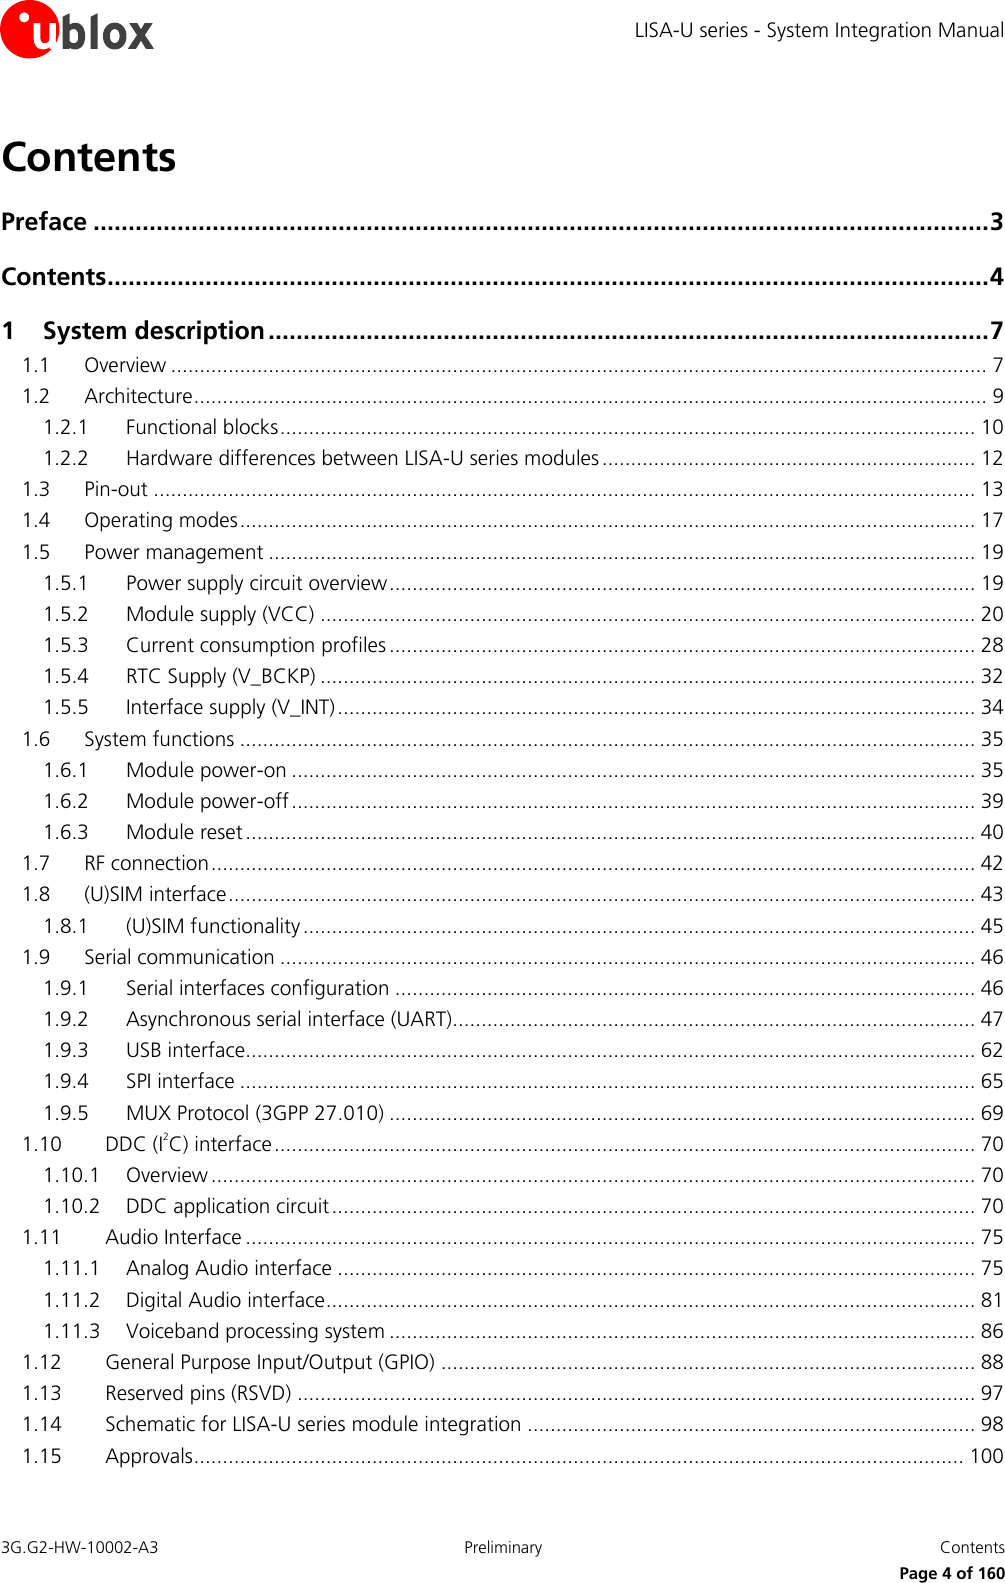 LISA-U series - System Integration Manual 3G.G2-HW-10002-A3  Preliminary  Contents      Page 4 of 160 Contents Preface ................................................................................................................................ 3 Contents .............................................................................................................................. 4 1 System description ....................................................................................................... 7 1.1 Overview .............................................................................................................................................. 7 1.2 Architecture .......................................................................................................................................... 9 1.2.1 Functional blocks ......................................................................................................................... 10 1.2.2 Hardware differences between LISA-U series modules ................................................................. 12 1.3 Pin-out ............................................................................................................................................... 13 1.4 Operating modes ................................................................................................................................ 17 1.5 Power management ........................................................................................................................... 19 1.5.1 Power supply circuit overview ...................................................................................................... 19 1.5.2 Module supply (VCC) .................................................................................................................. 20 1.5.3 Current consumption profiles ...................................................................................................... 28 1.5.4 RTC Supply (V_BCKP) .................................................................................................................. 32 1.5.5 Interface supply (V_INT) ............................................................................................................... 34 1.6 System functions ................................................................................................................................ 35 1.6.1 Module power-on ....................................................................................................................... 35 1.6.2 Module power-off ....................................................................................................................... 39 1.6.3 Module reset ............................................................................................................................... 40 1.7 RF connection ..................................................................................................................................... 42 1.8 (U)SIM interface .................................................................................................................................. 43 1.8.1 (U)SIM functionality ..................................................................................................................... 45 1.9 Serial communication ......................................................................................................................... 46 1.9.1 Serial interfaces configuration ..................................................................................................... 46 1.9.2 Asynchronous serial interface (UART)........................................................................................... 47 1.9.3 USB interface............................................................................................................................... 62 1.9.4 SPI interface ................................................................................................................................ 65 1.9.5 MUX Protocol (3GPP 27.010) ...................................................................................................... 69 1.10 DDC (I2C) interface .......................................................................................................................... 70 1.10.1 Overview ..................................................................................................................................... 70 1.10.2 DDC application circuit ................................................................................................................ 70 1.11 Audio Interface ............................................................................................................................... 75 1.11.1 Analog Audio interface ............................................................................................................... 75 1.11.2 Digital Audio interface ................................................................................................................. 81 1.11.3 Voiceband processing system ...................................................................................................... 86 1.12 General Purpose Input/Output (GPIO) ............................................................................................. 88 1.13 Reserved pins (RSVD) ...................................................................................................................... 97 1.14 Schematic for LISA-U series module integration .............................................................................. 98 1.15 Approvals ...................................................................................................................................... 100 